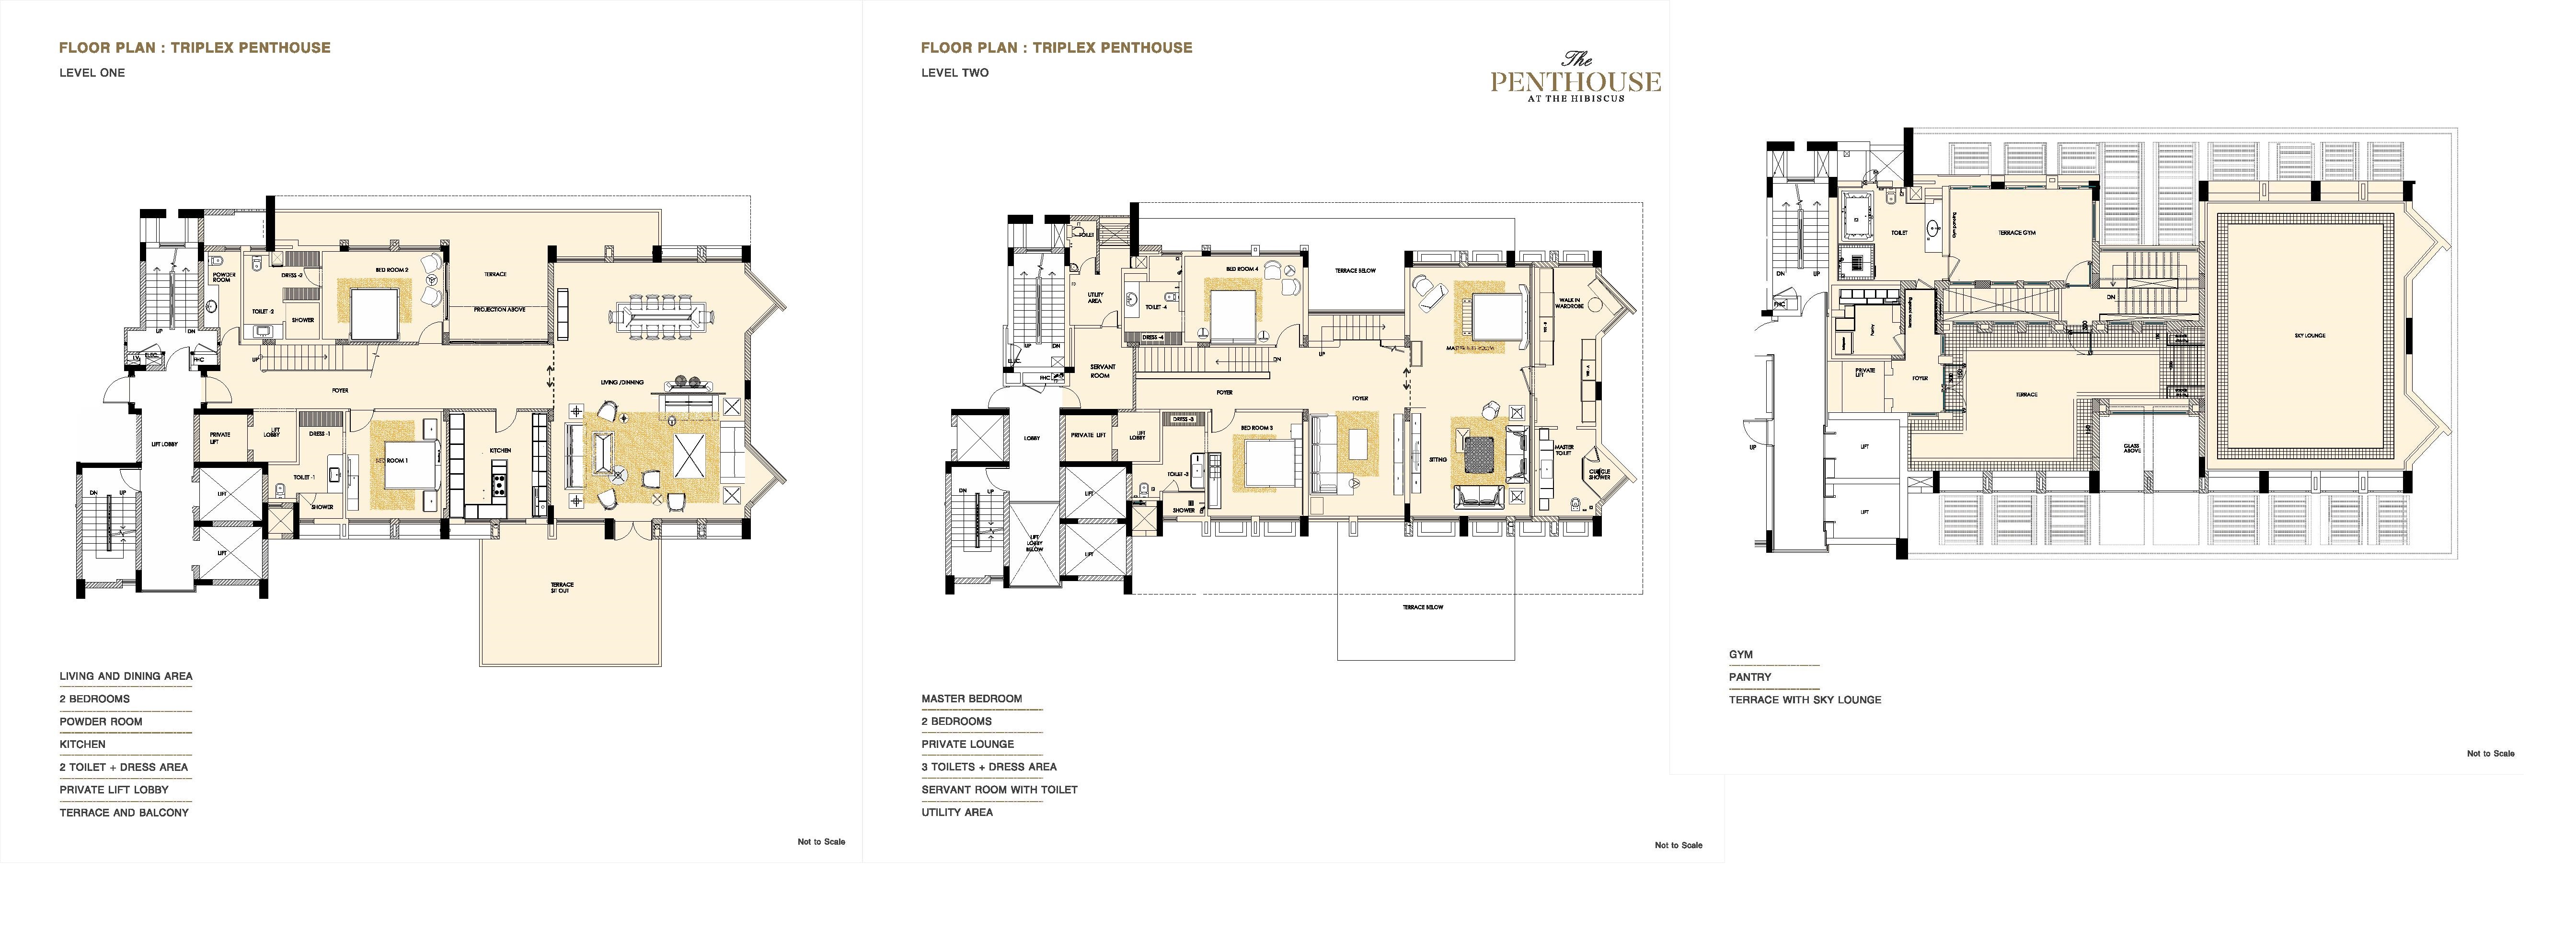 The Penthouse at The Hibiscus Floor Plan